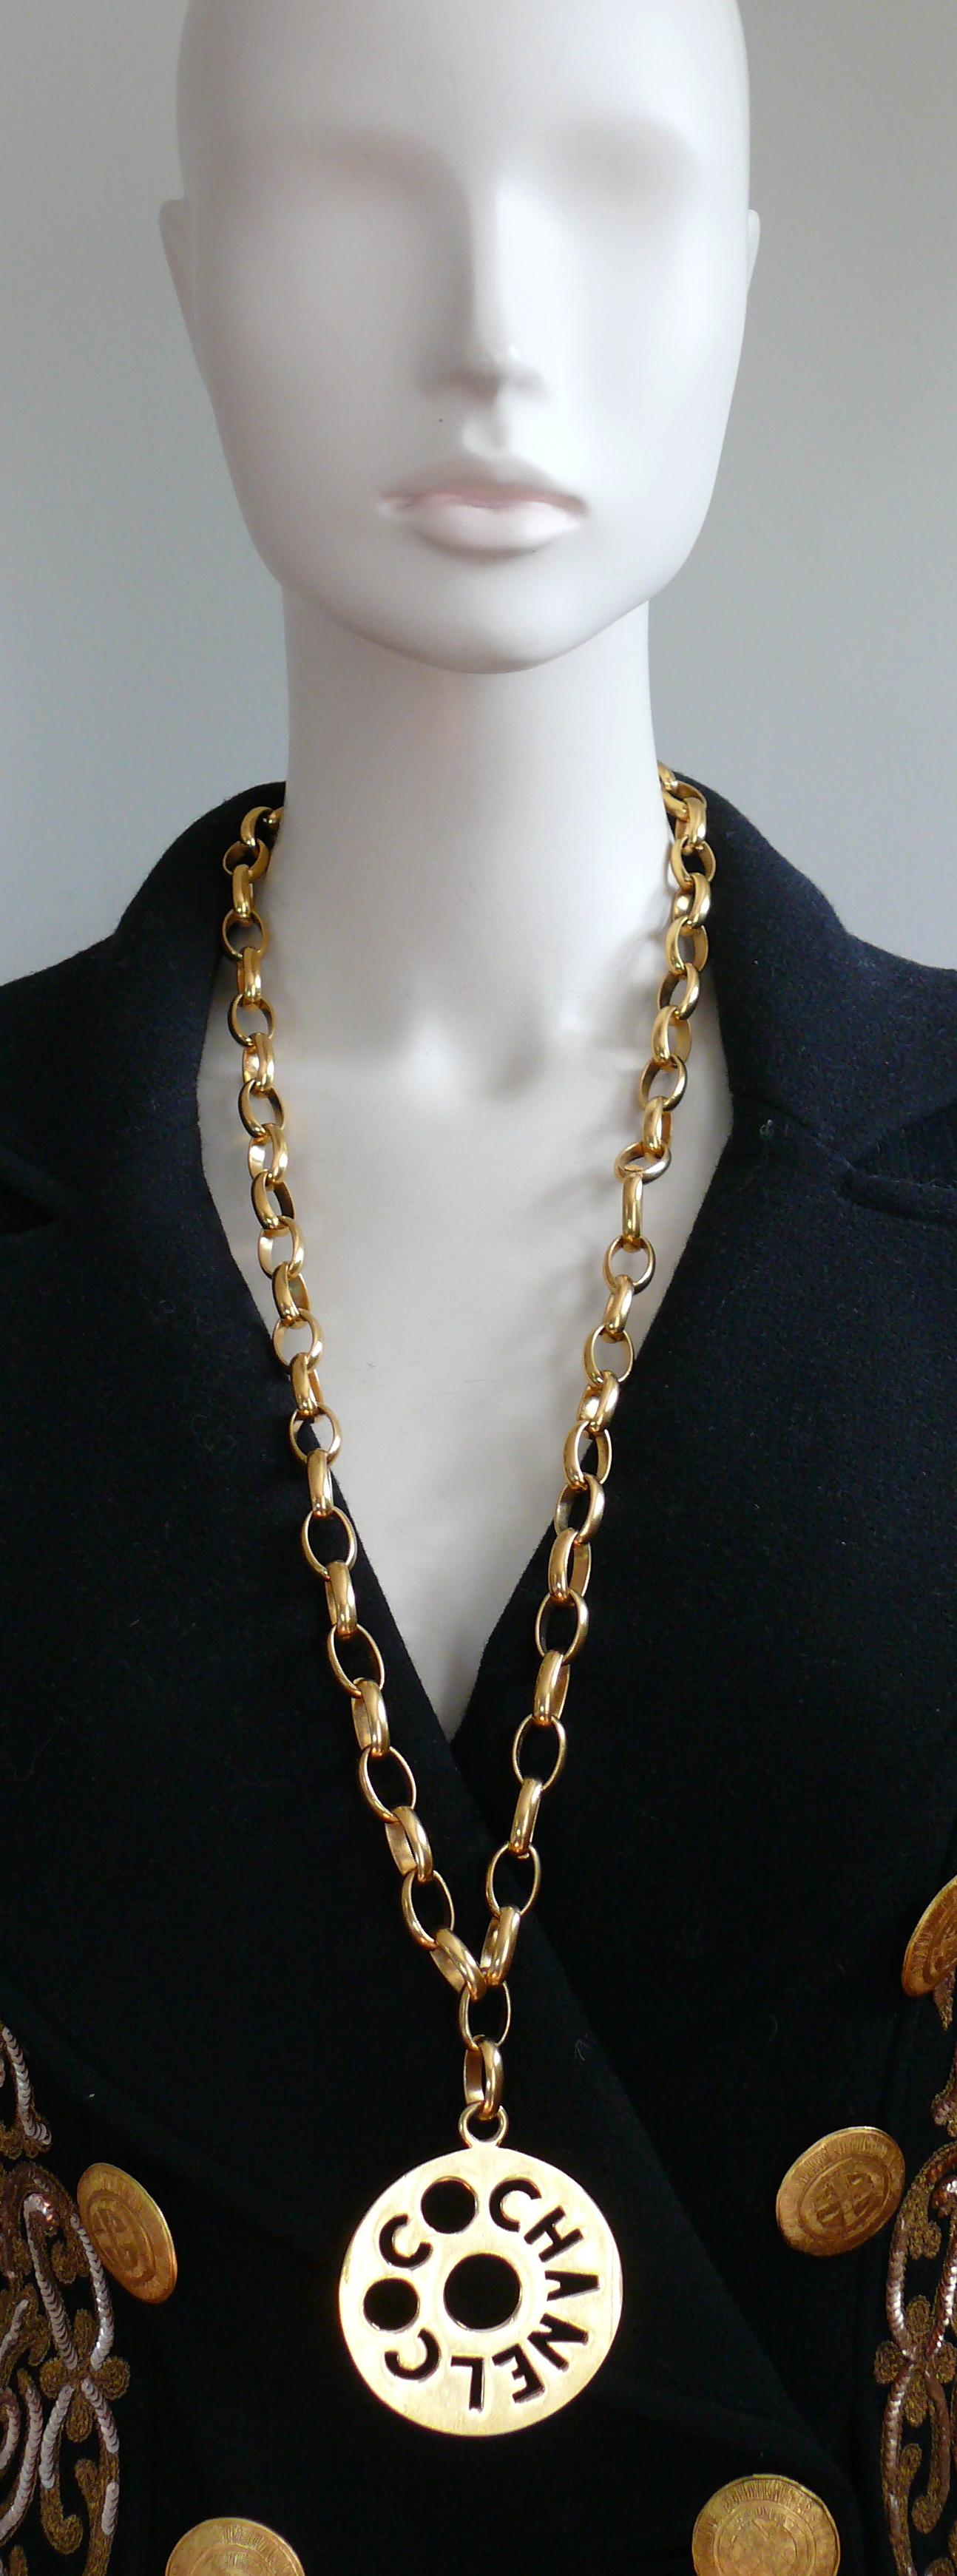 CHANEL vintage gold toned long chunky link chain necklace featuring a massive COCO CHANEL cutout openwork medallion pendant.

Hook closure.

Embossed CHANEL on the hook.

Indicative measurements : max. chain length approx. 81 cm (31.89 inches) /